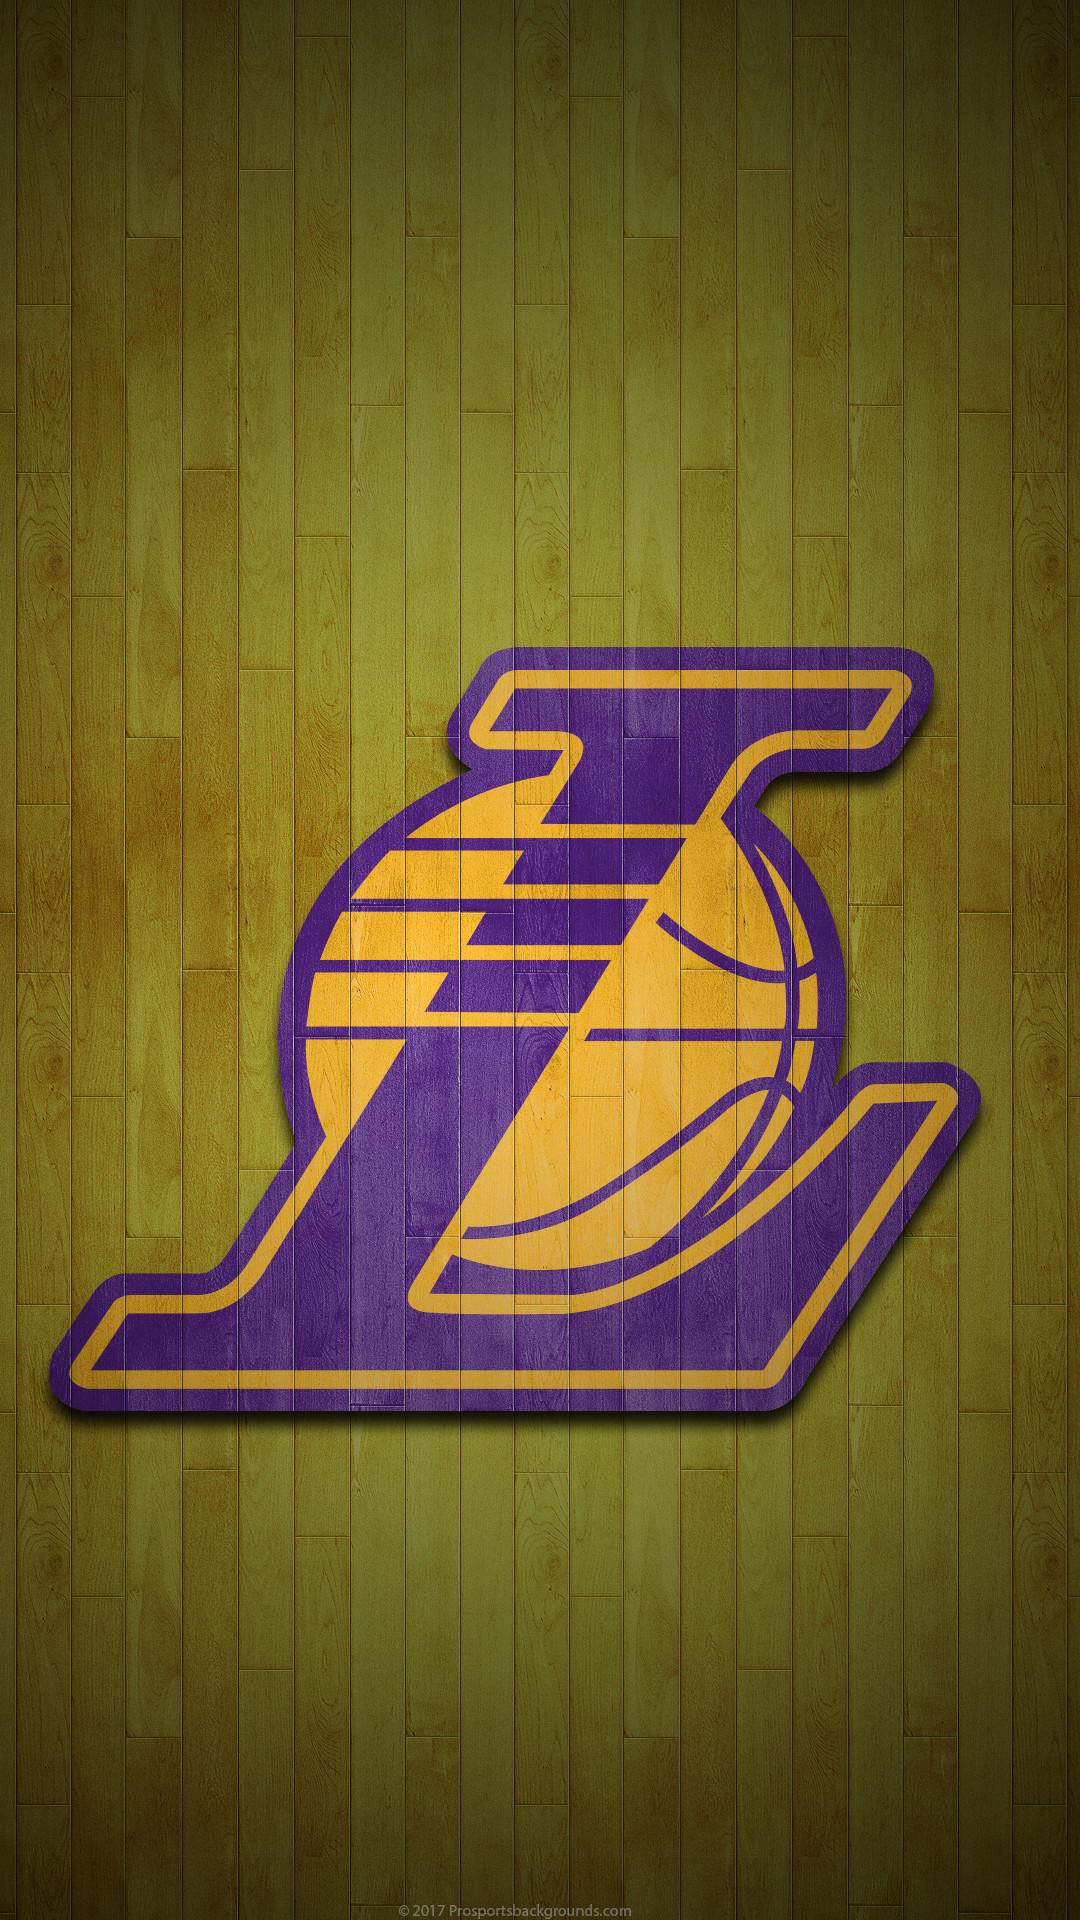 1080x1920 ... Los Angeles Lakers 2017 nba basketball hardwood team logo wallpaper for  iphone andriod and windows mobile